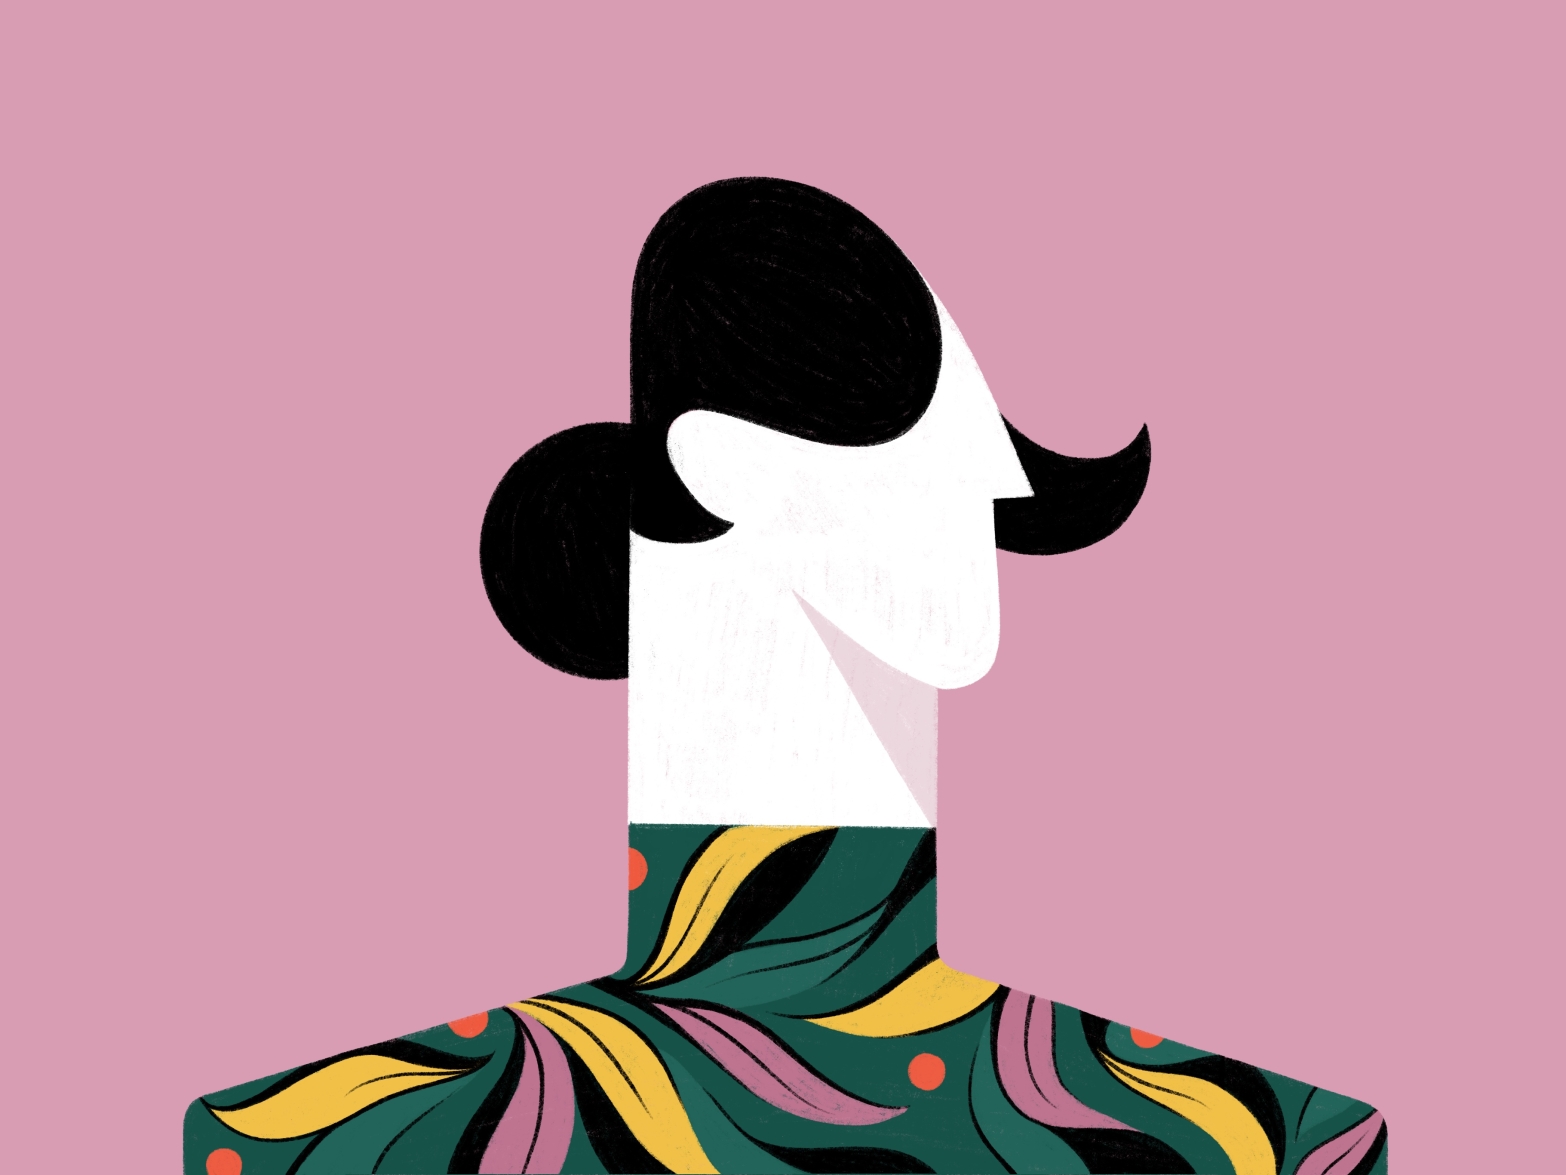 Portrait of a Girl by Brianna Miller on Dribbble